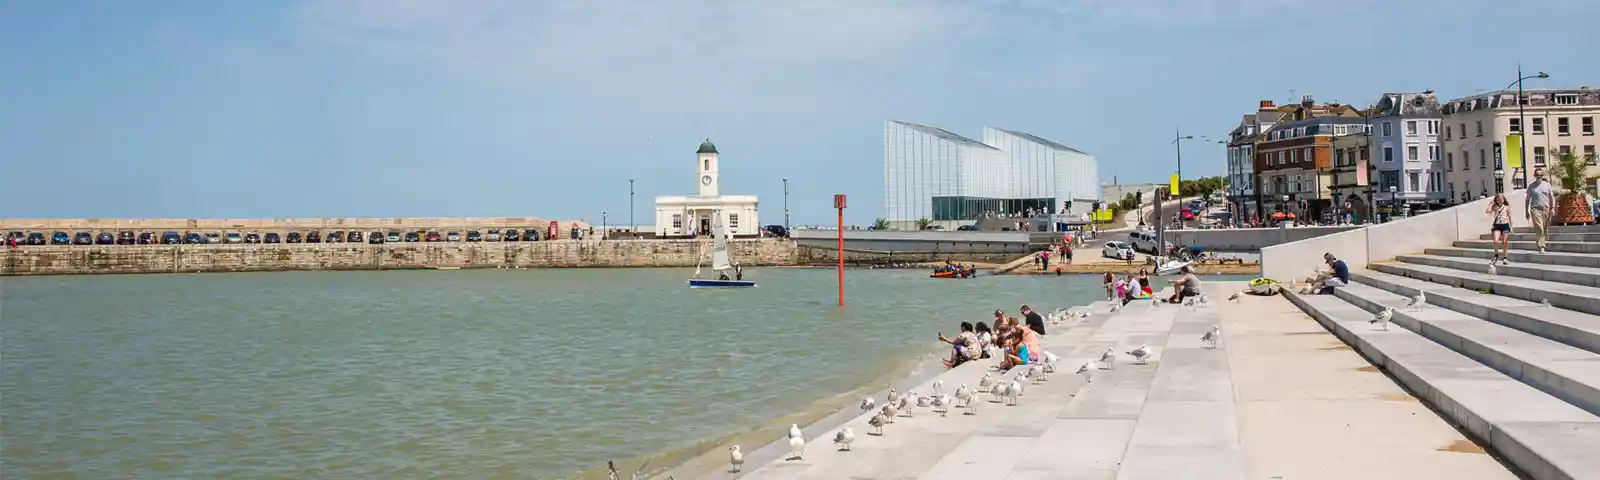 margate-beach-with-people-13.jpg